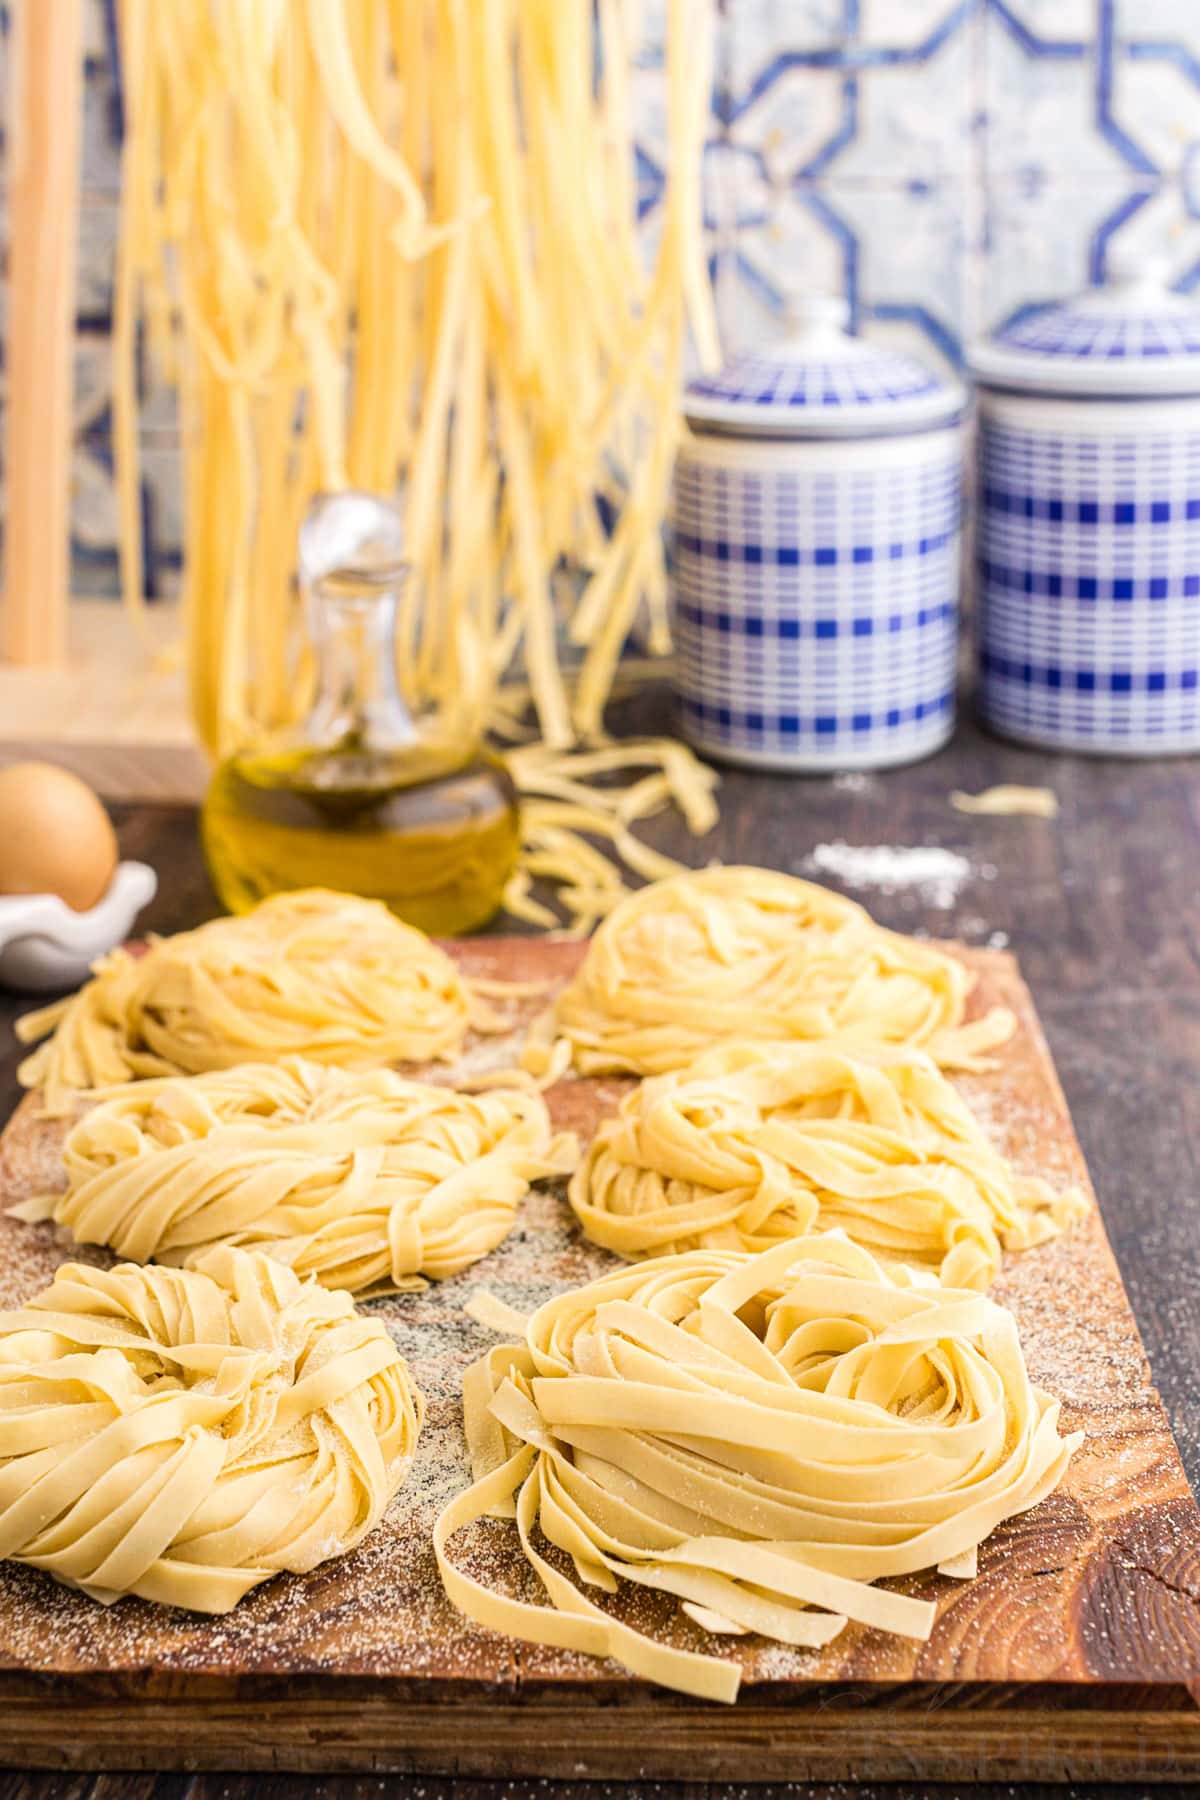 Homemade pasta on a wooden kitchen board, pasta strips hanging from a pasta machine, blue decorative ingredients jars in the background with blue patterned tiled wall.